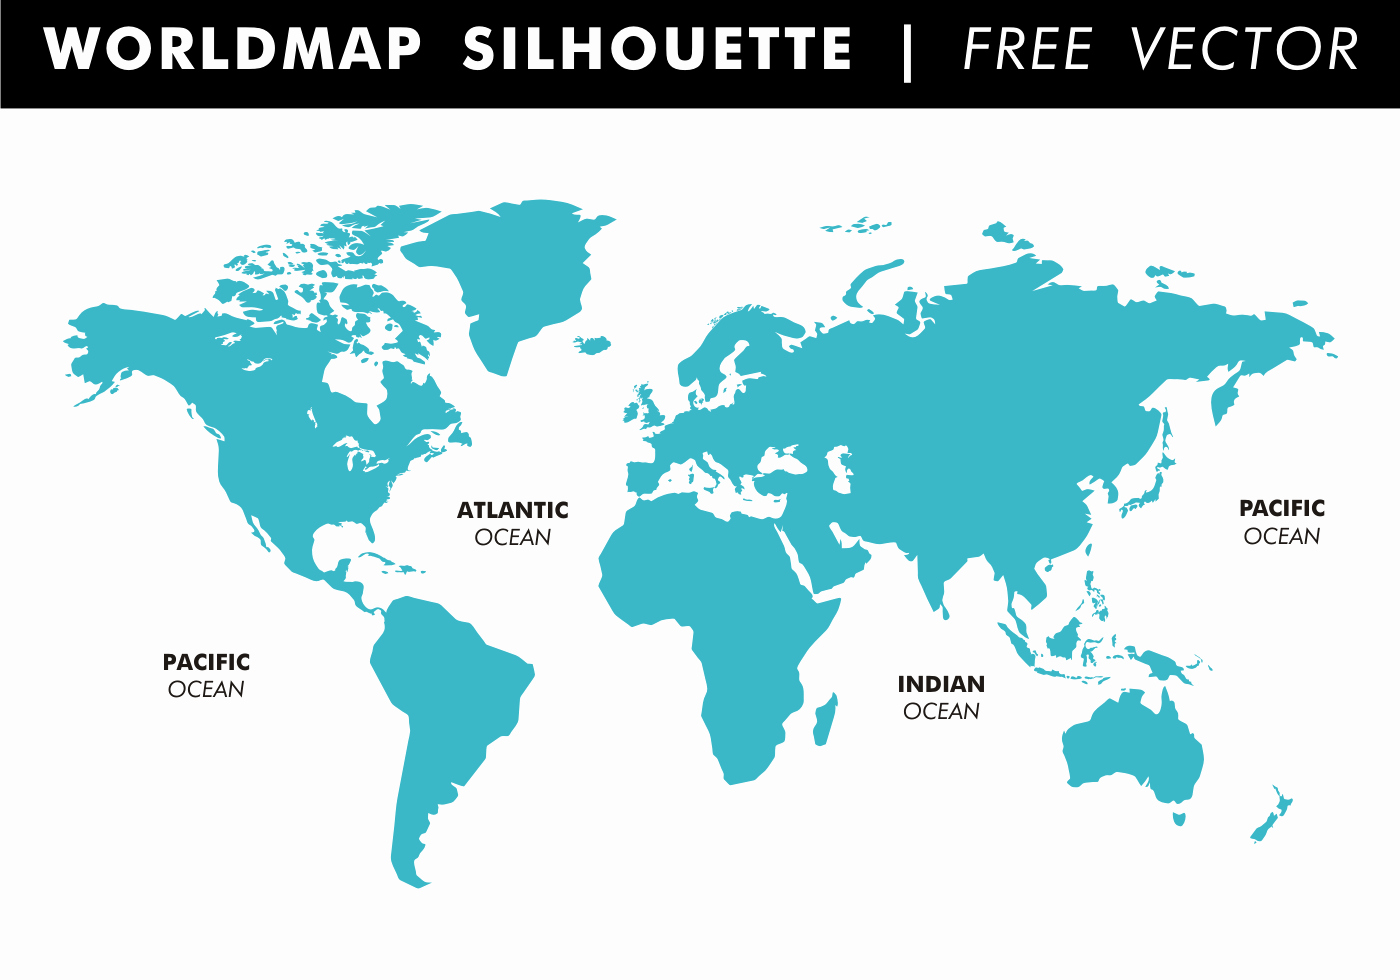 Free World Map Poster Unique Worldmap Silhouette Free Vector Download Free Vector Art